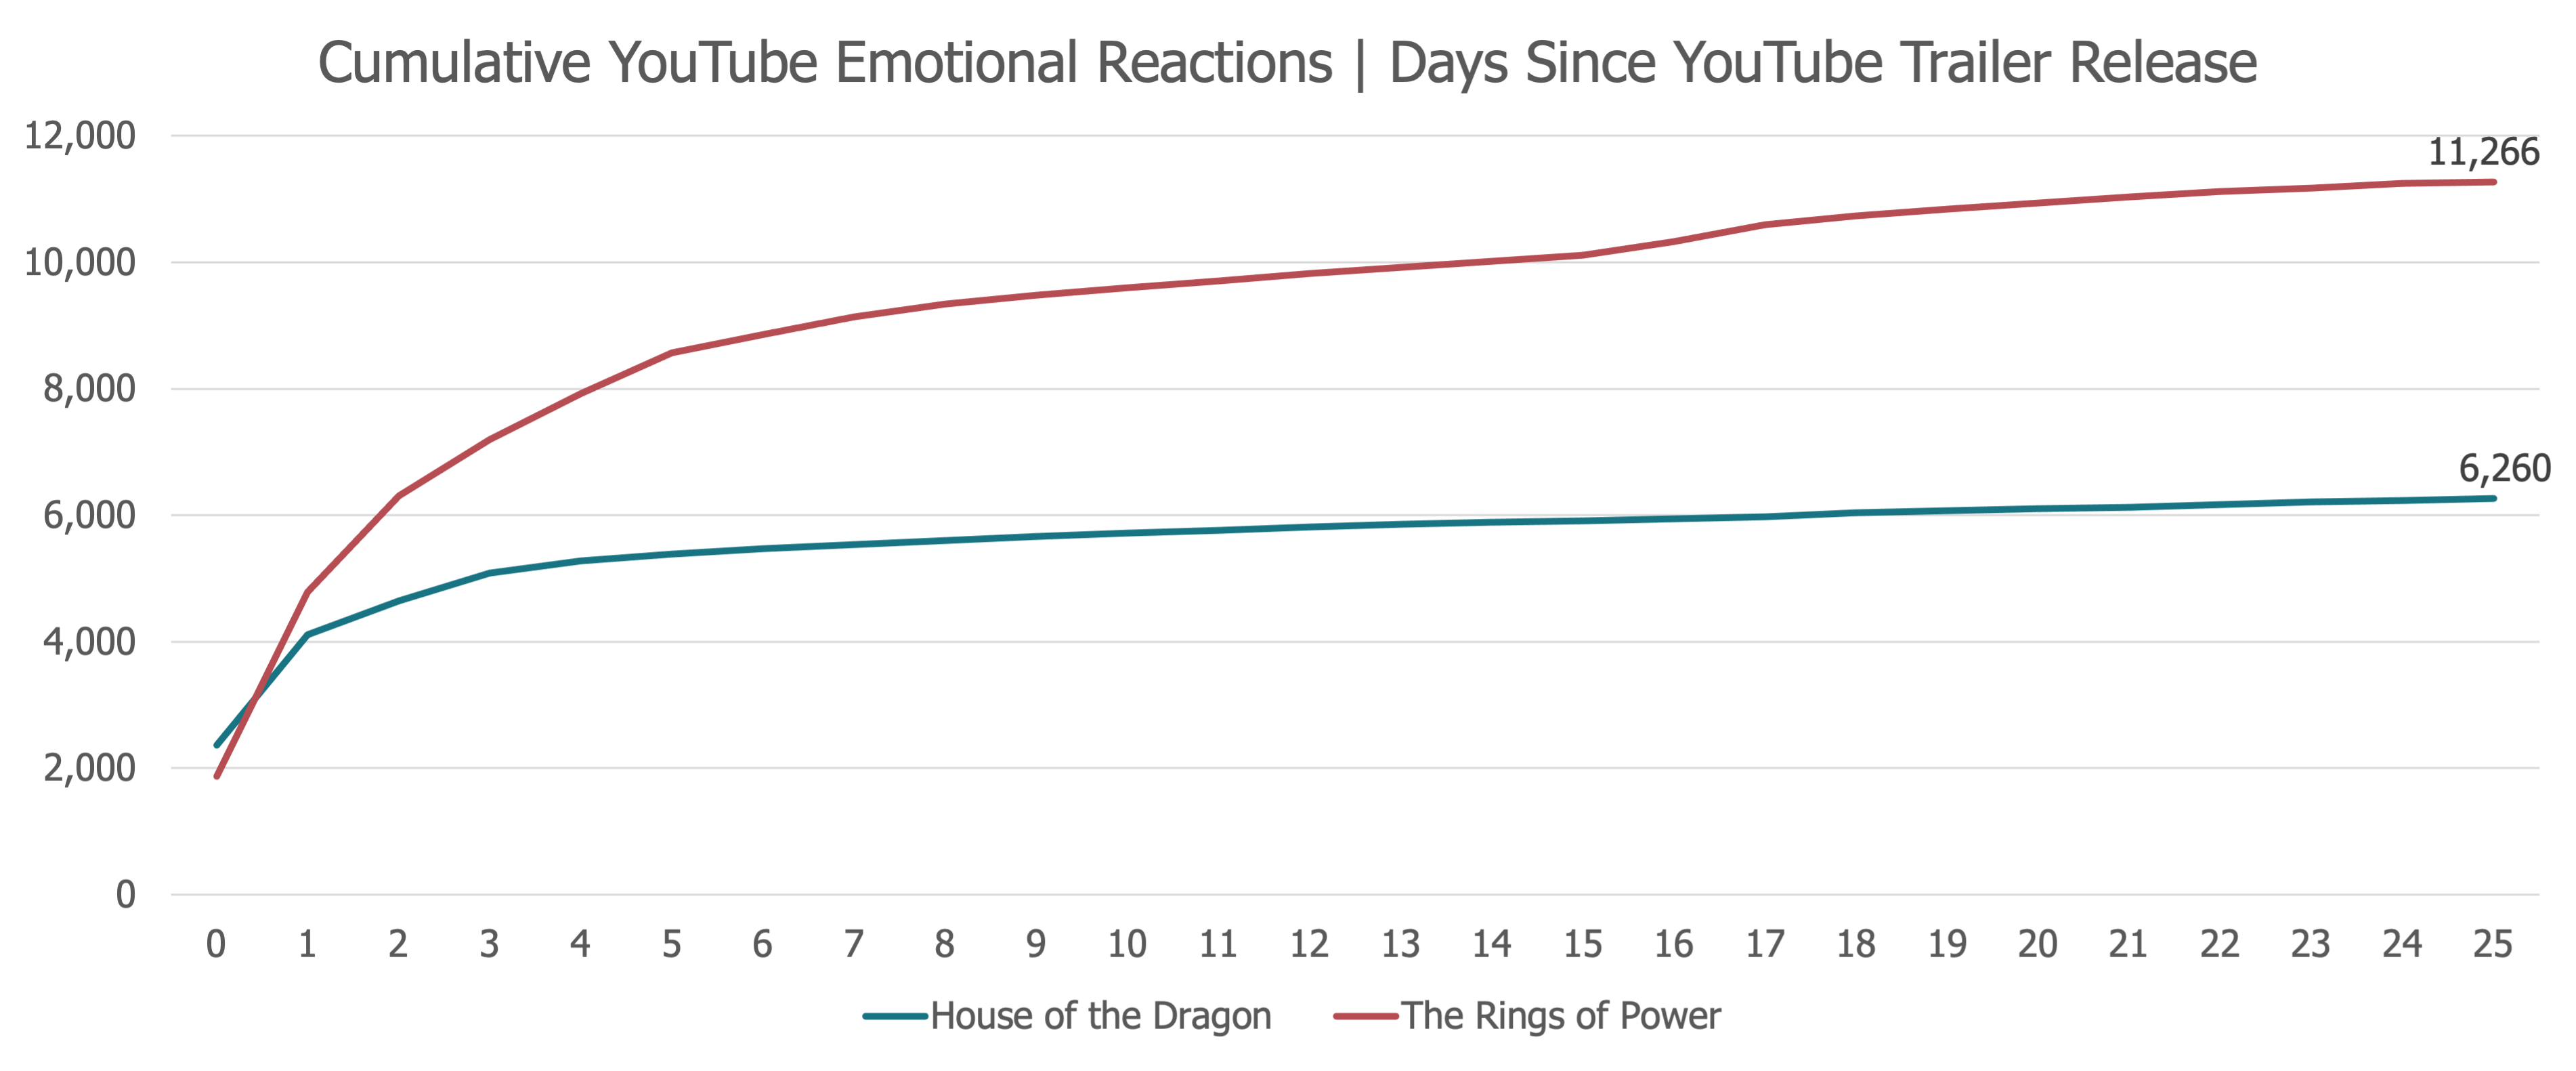 Cumulative YouTube Emotional Reactions | Days Since YouTube Trailer Release